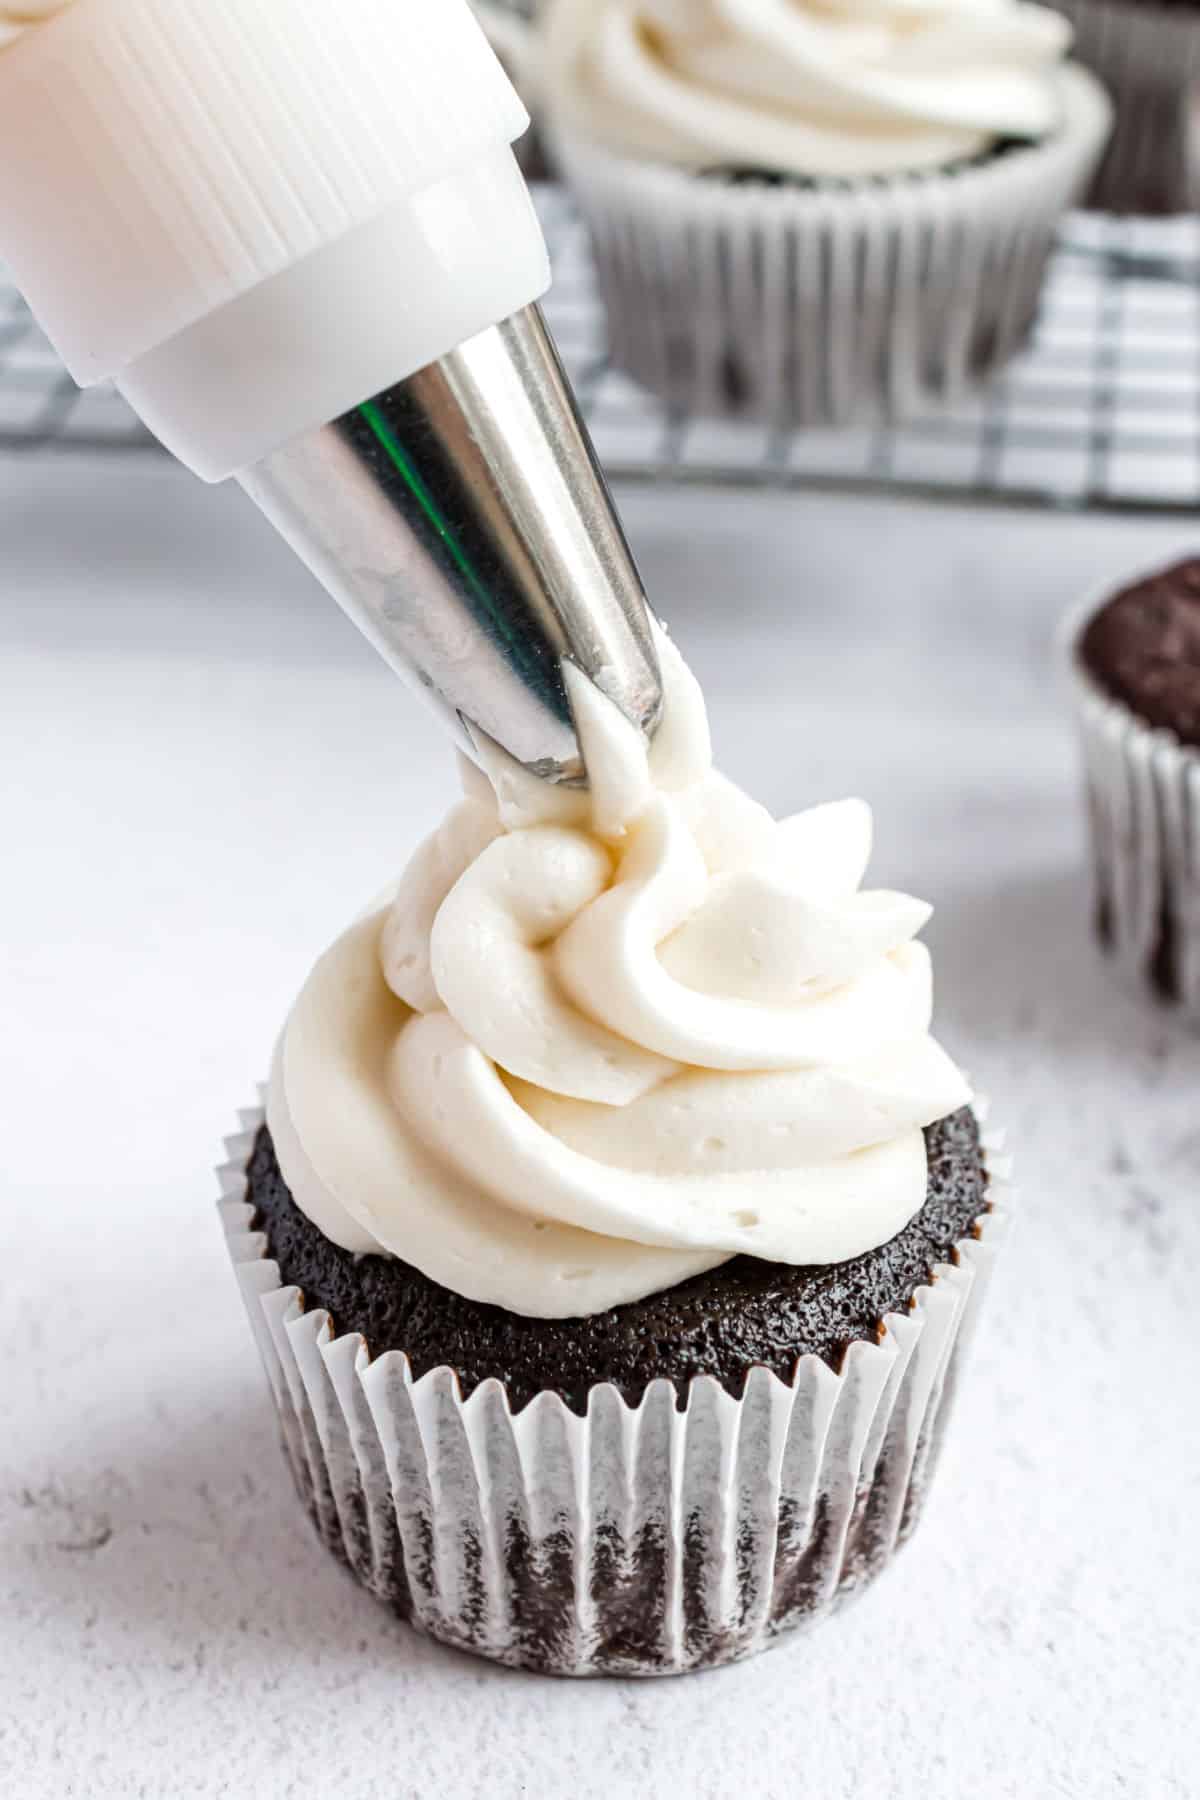 Vanilla frosting piped onto chocolate cupcakes.